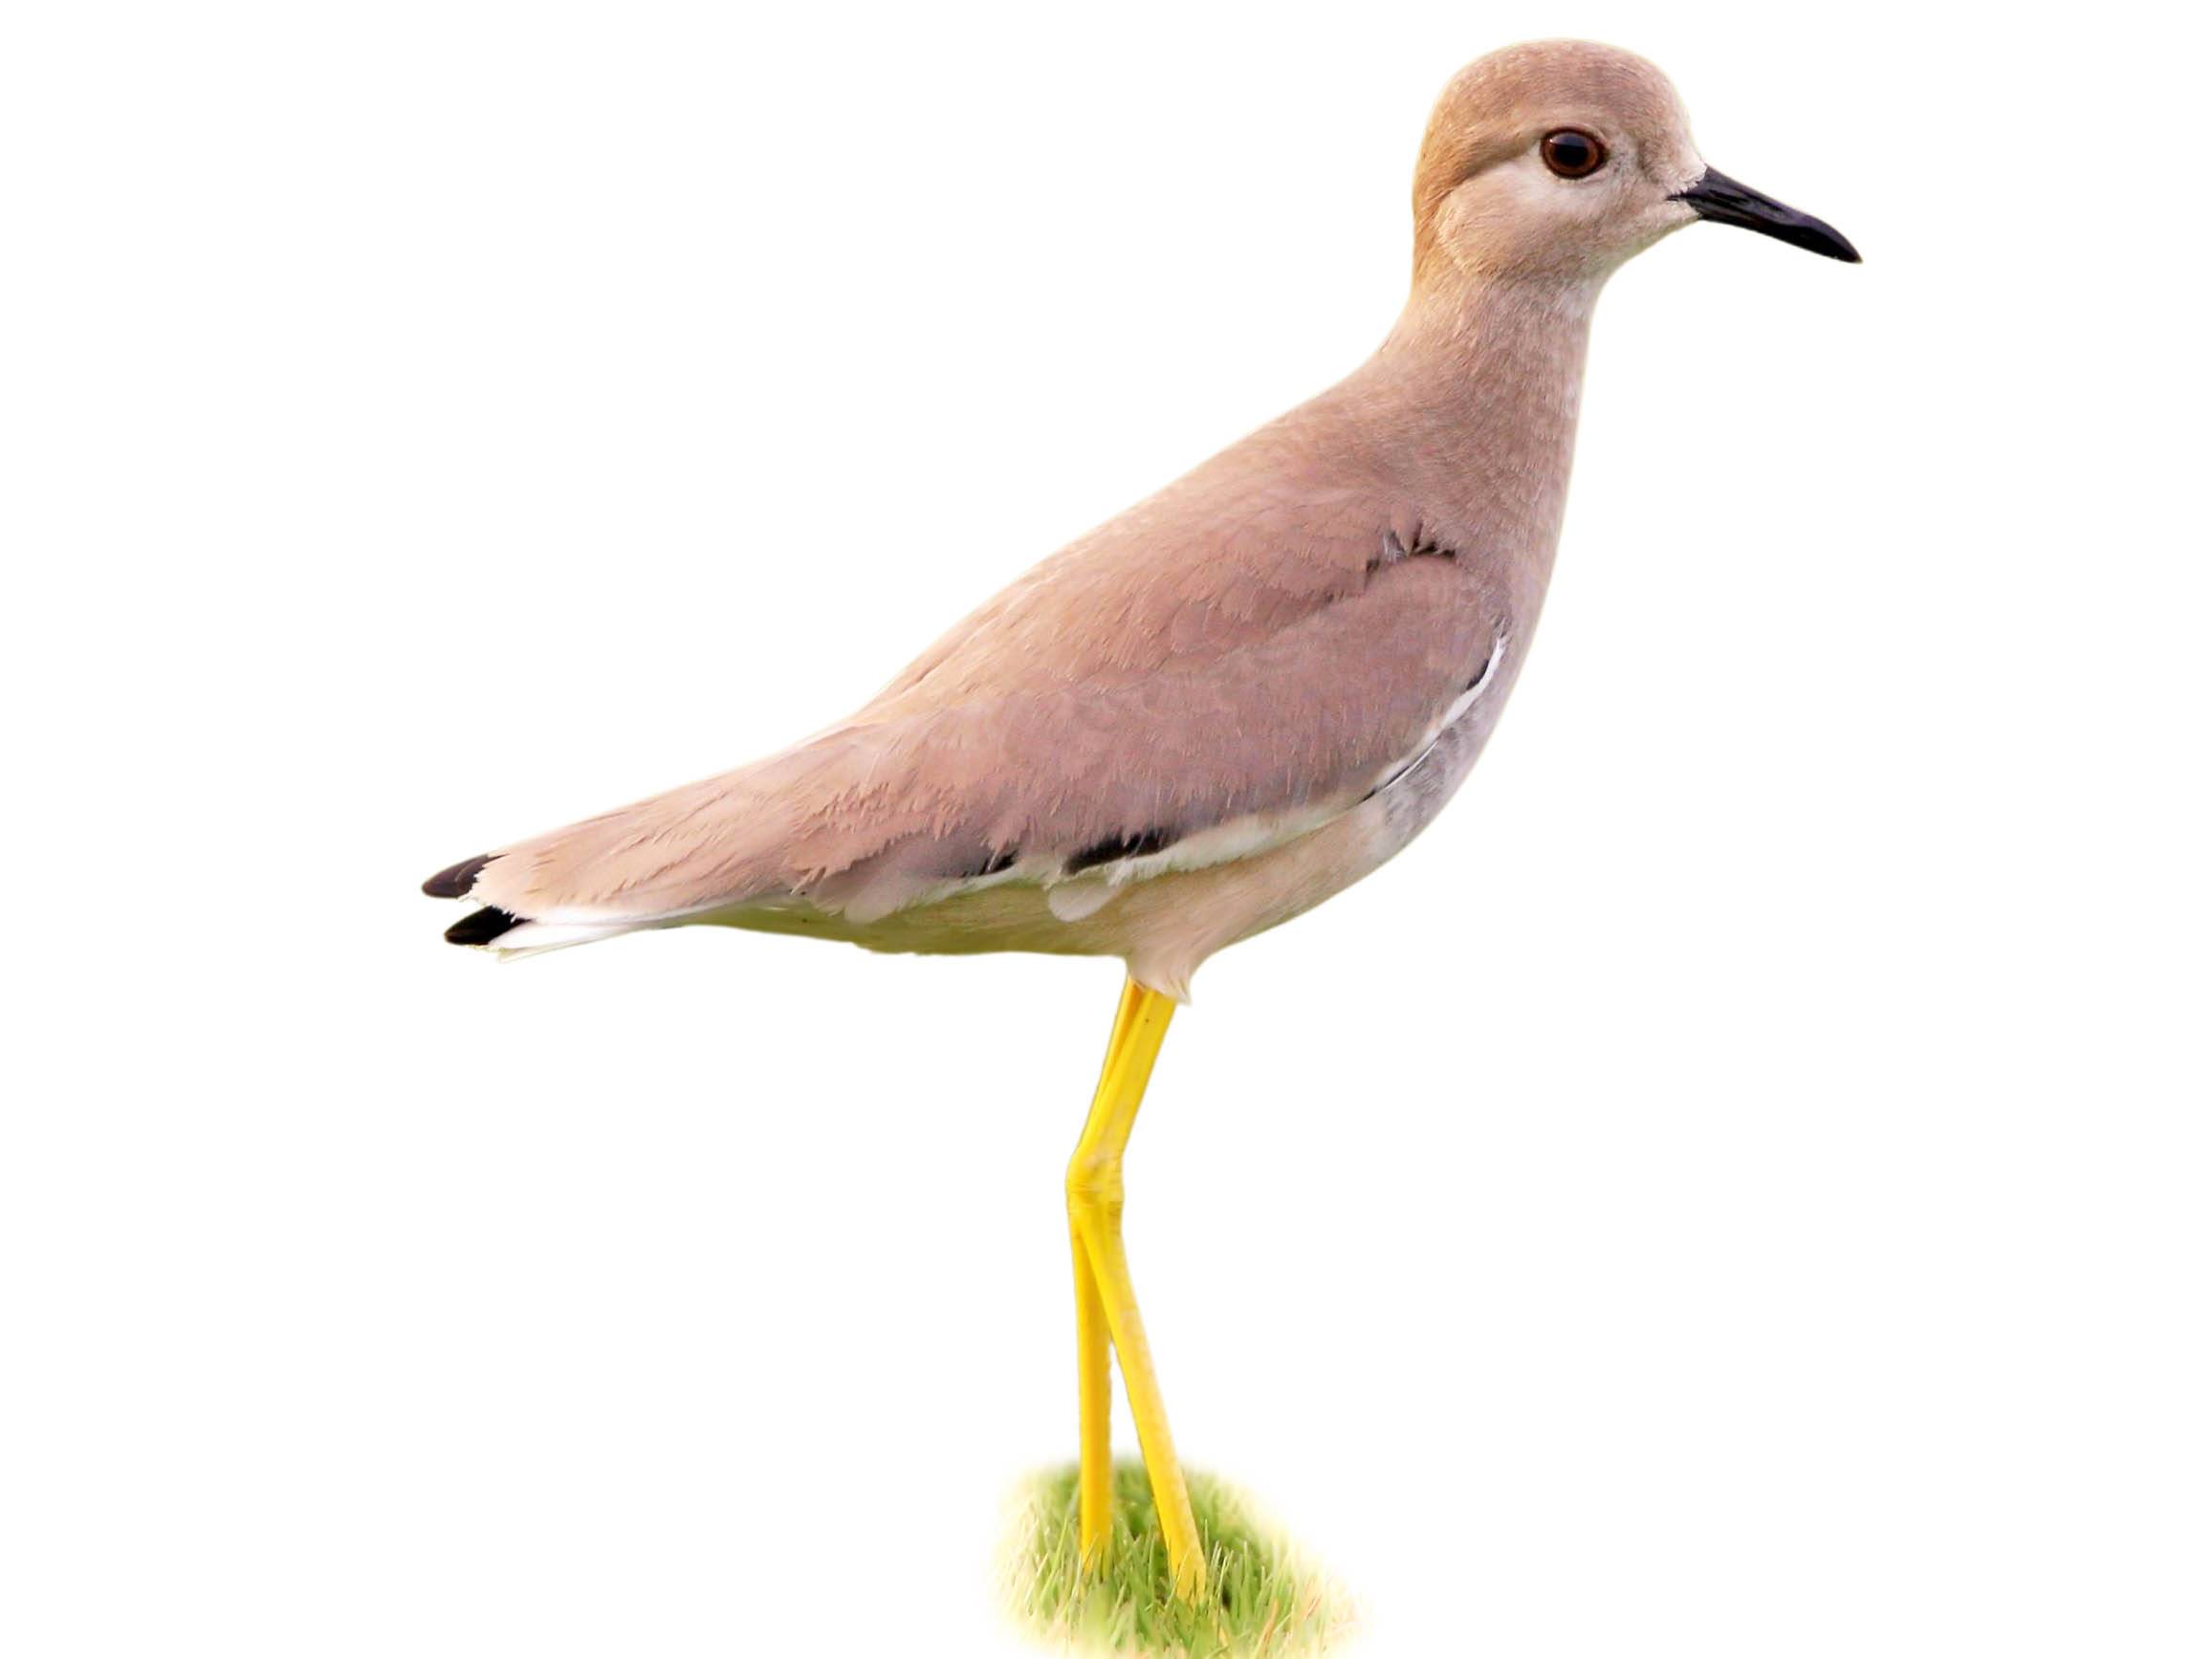 A photo of a White-tailed Lapwing (Vanellus leucurus)